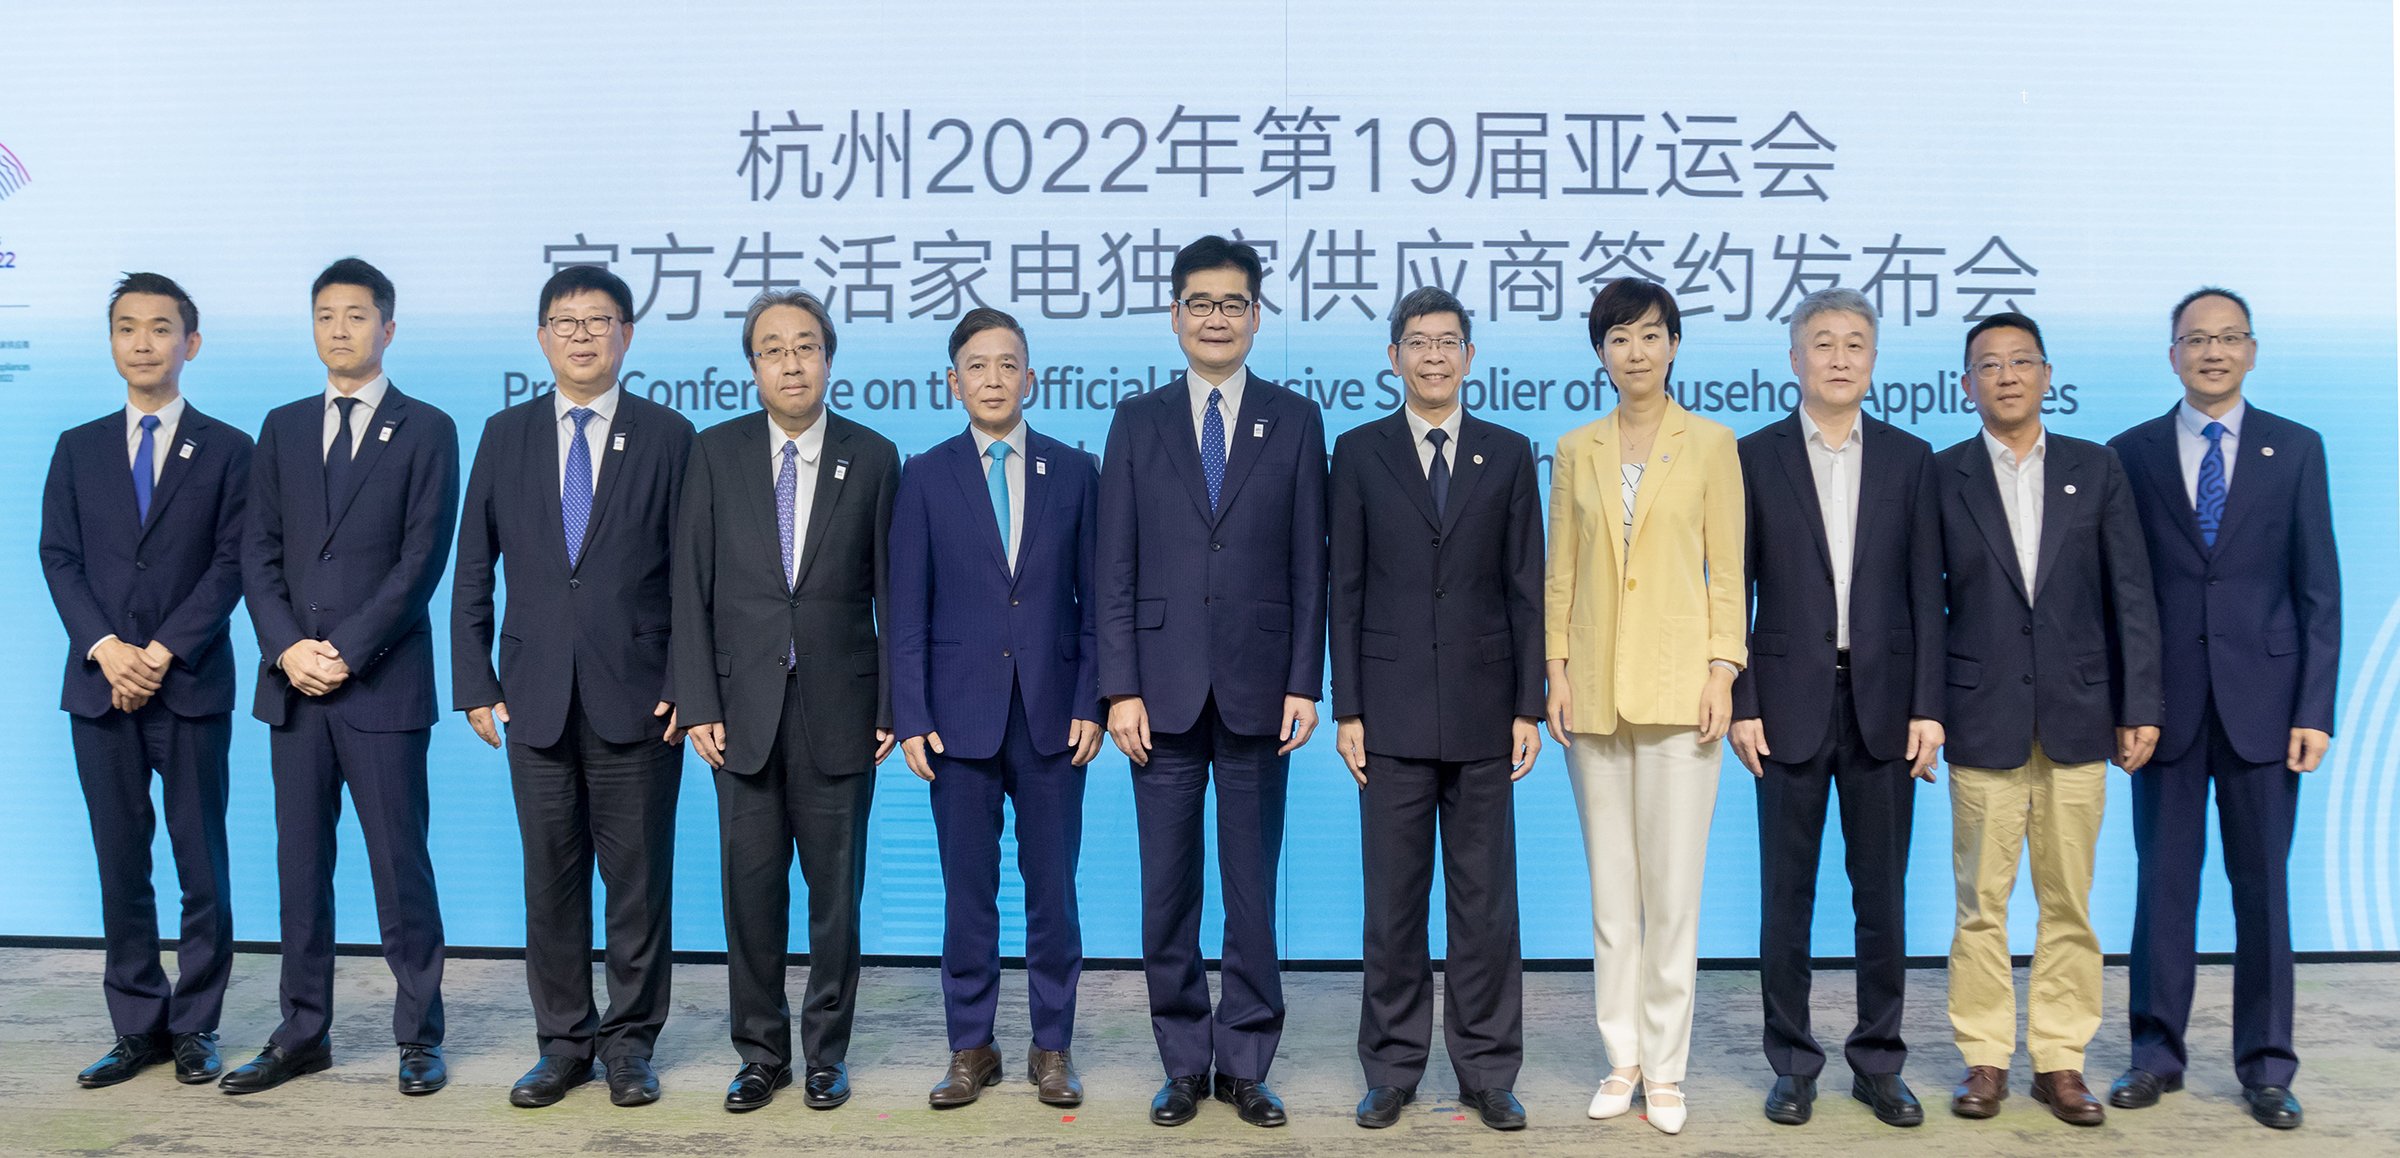 Photo: press conference held on June 10, 2021 in Hangzhou